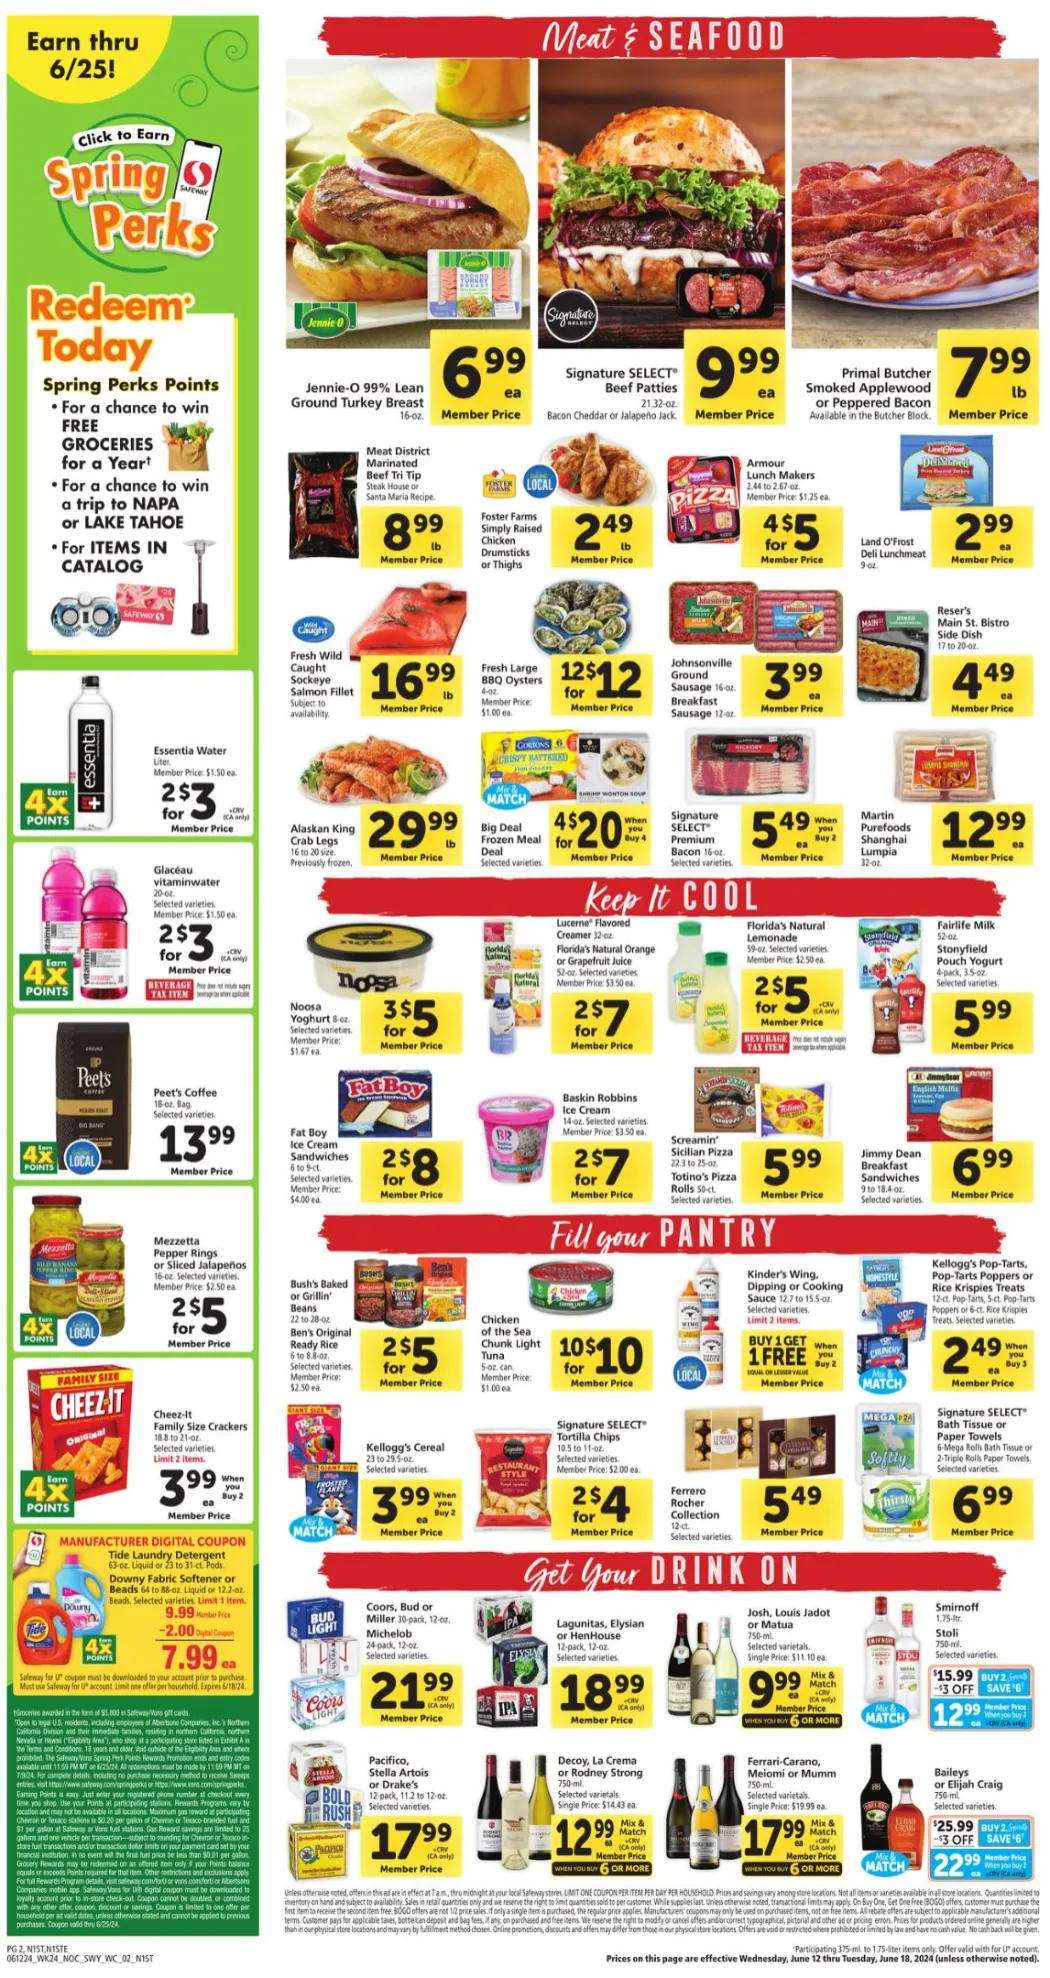 Safeway Weekly Ad July 2024 Weekly Sales, Deals, Discounts and Digital Coupons.